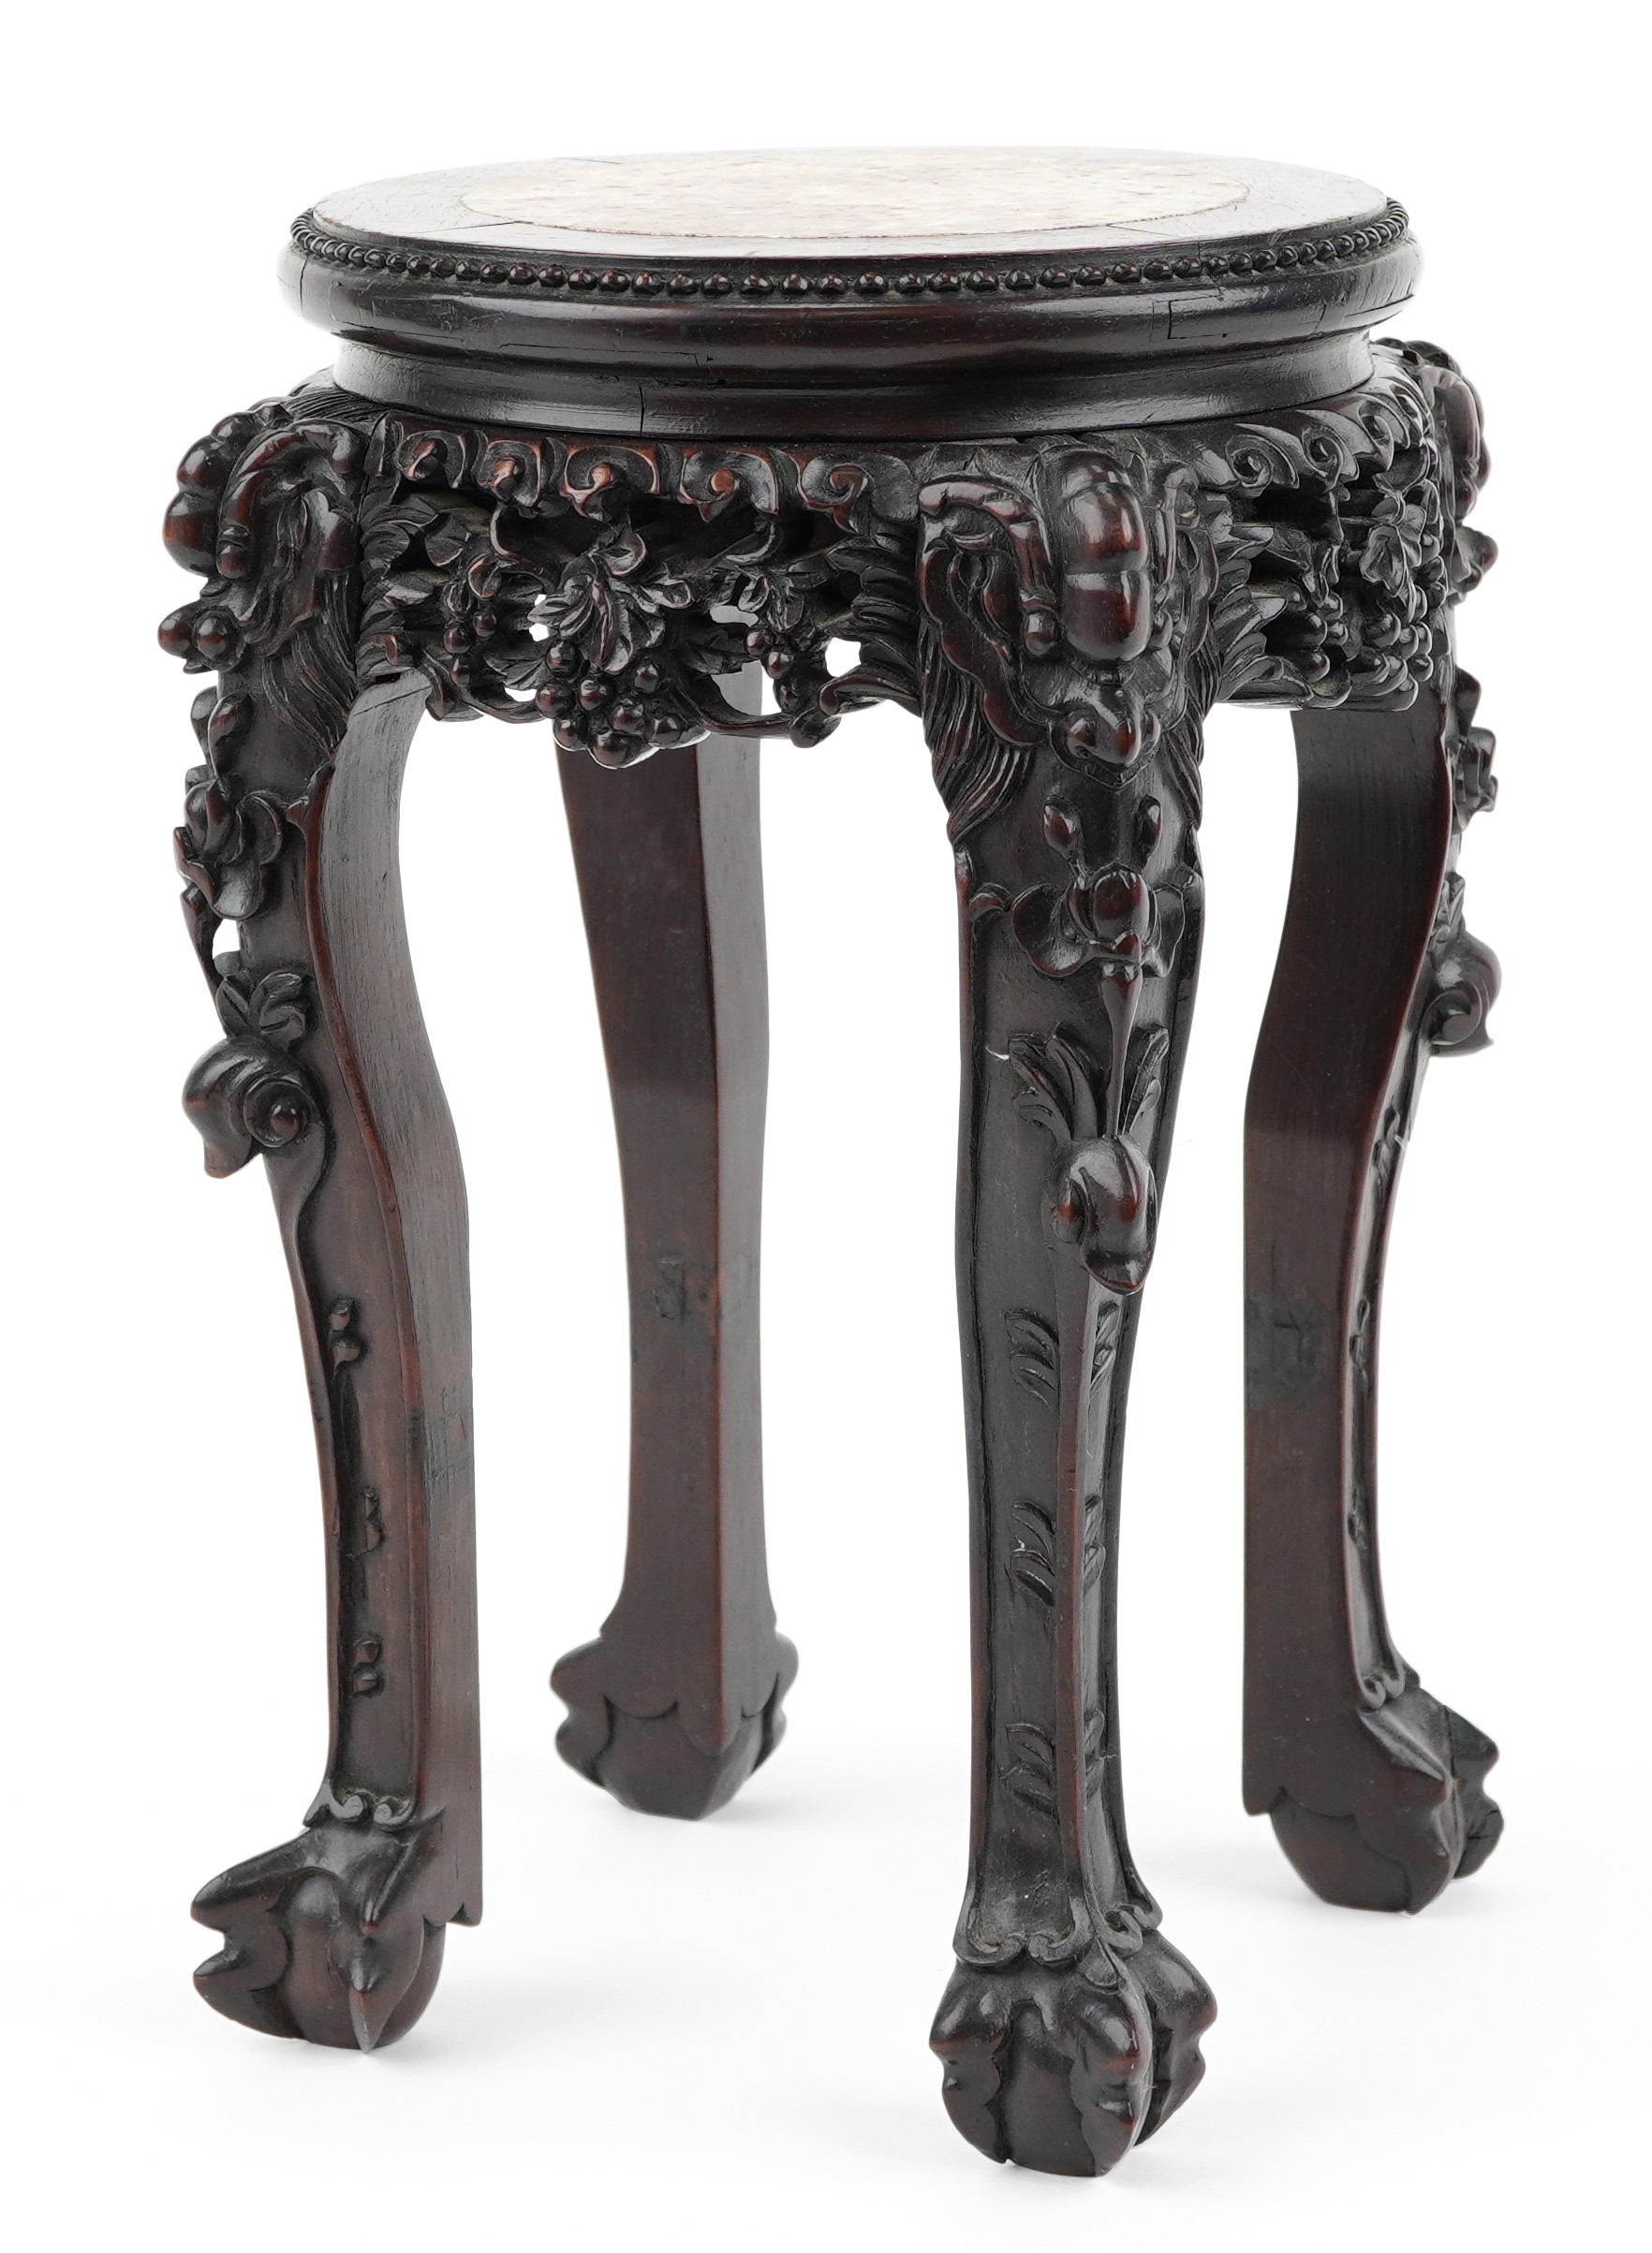 Chinese hardwood vase stand with inset marble top finely carved with mythical faces and foliage,